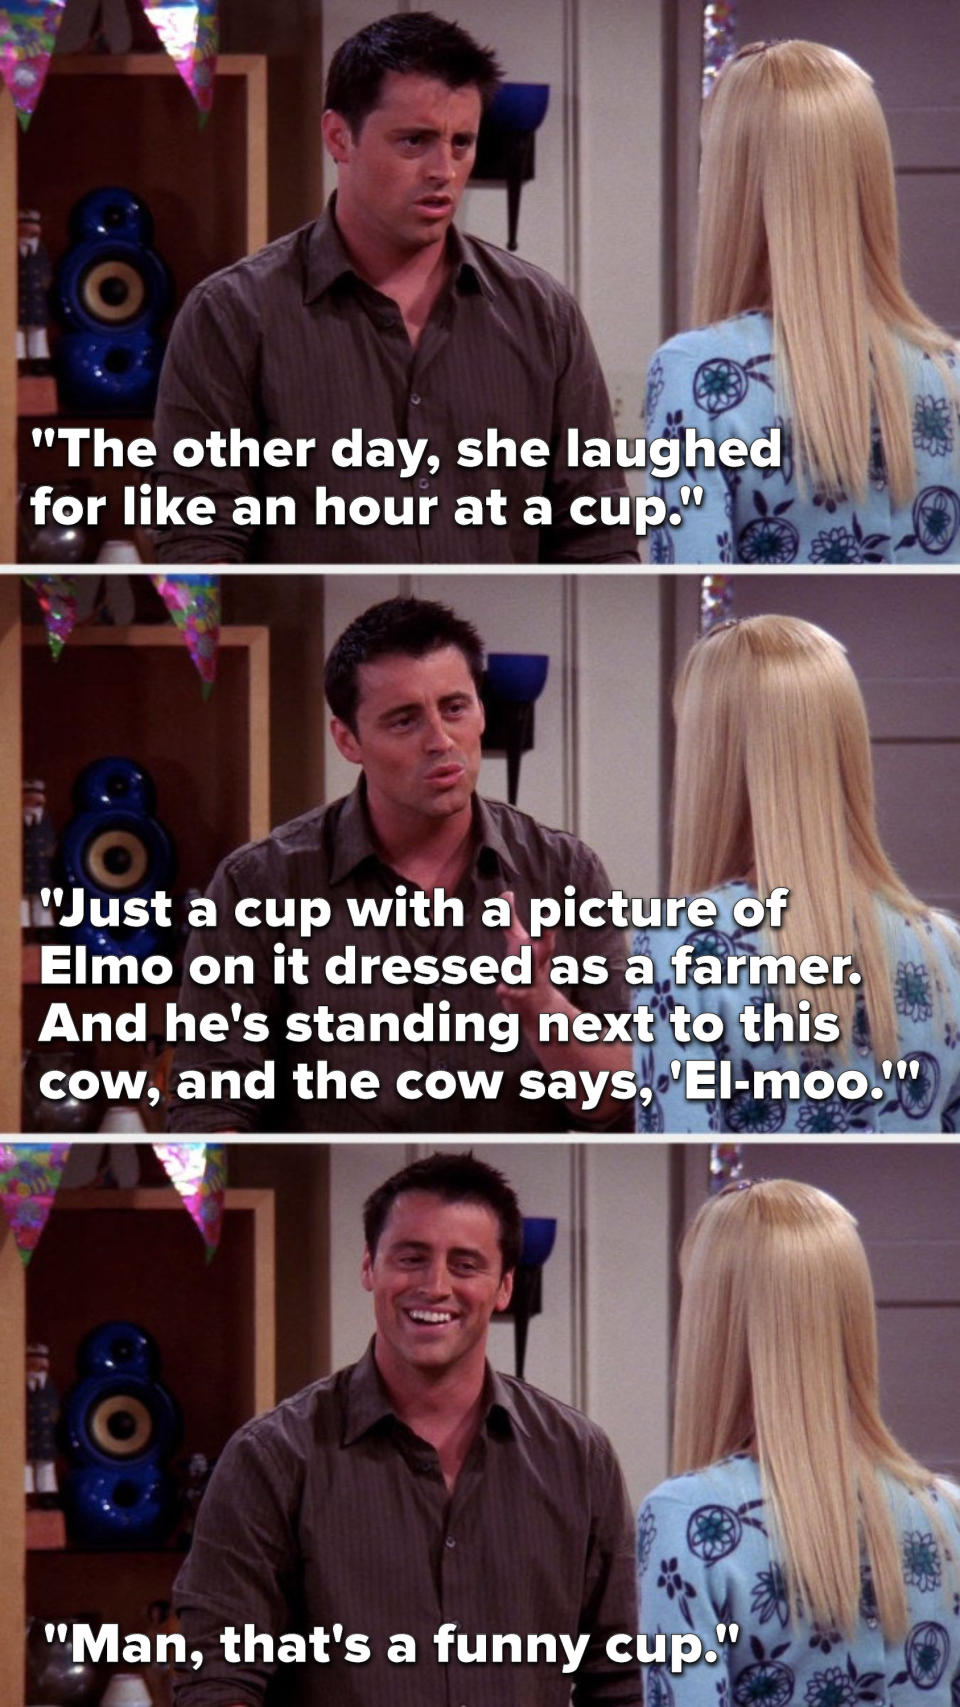 Joey says, &quot;The other day, she laughed for like an hour at a cup, just a cup with a picture of Elmo on it dressed as a farmer, and he&#39;s standing next to this cow, and the cow says, &#39;El-moo,&#39; then Joey laughs and says, &quot;Man, that&#39;s a funny cup&quot;